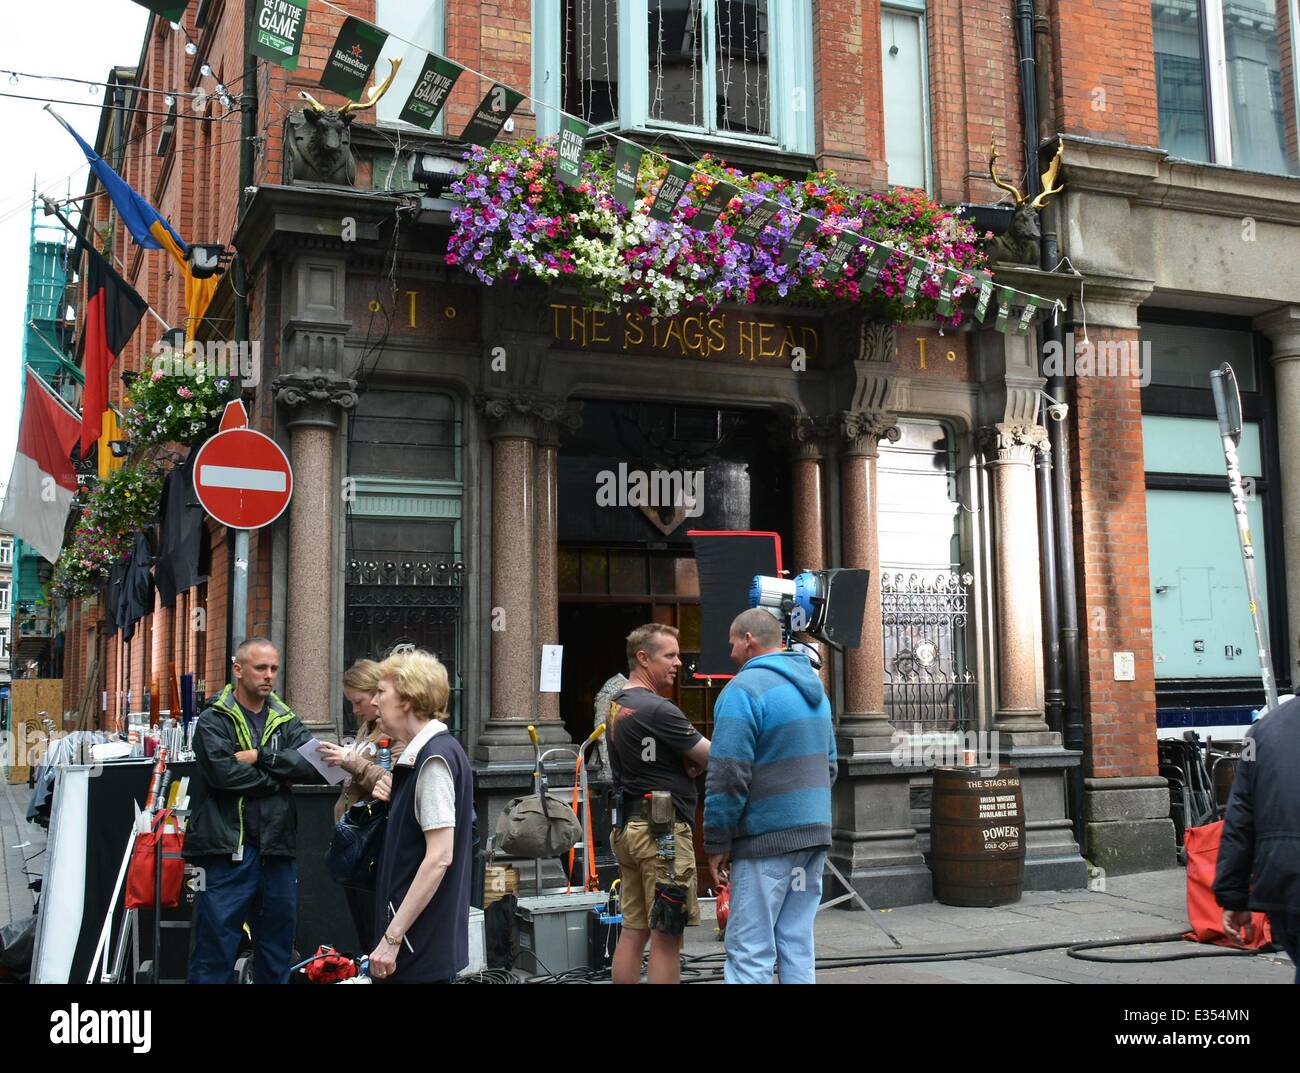 Actors Ray Winstone andAneurin Barnard film scenes for Sky TV's new drama 'Moonfleet' at The Stags Head pub  Featuring: The Stags Head Where: Dublin, Ireland When: 24 Jun 2013 Stock Photo